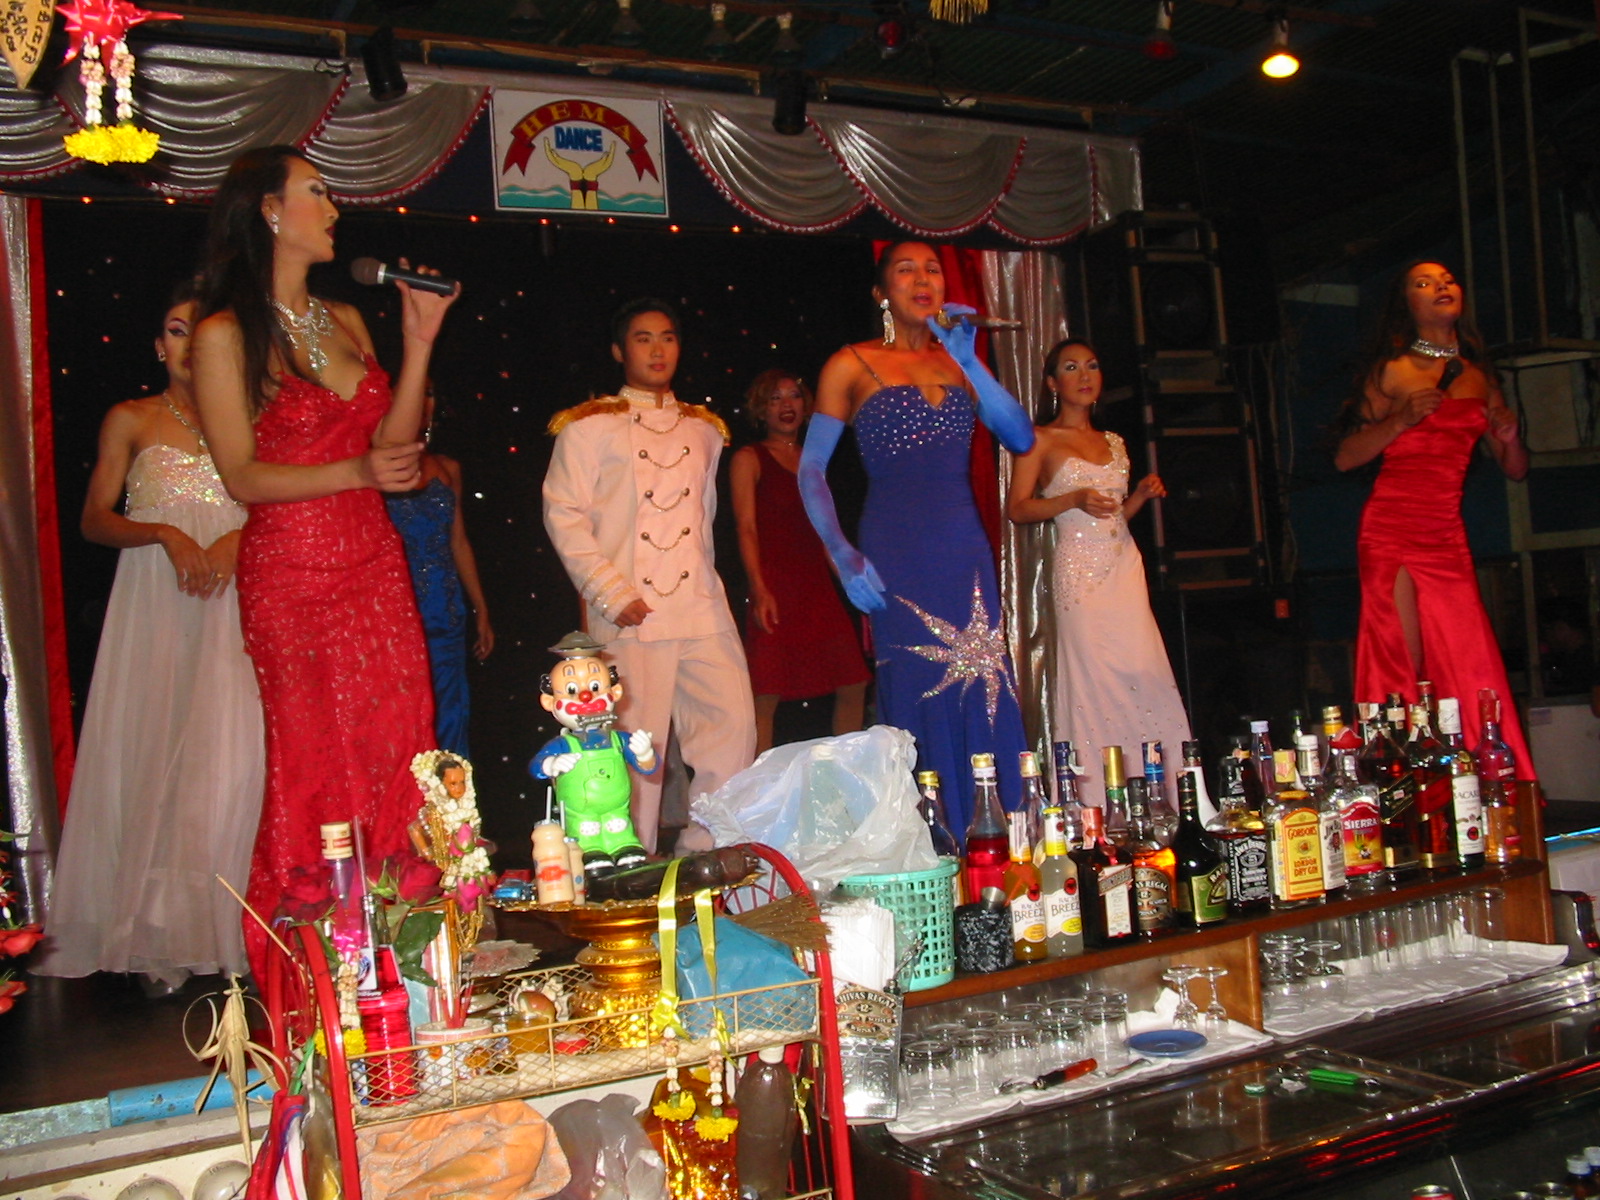 The cabaret at the bar in Pattaya